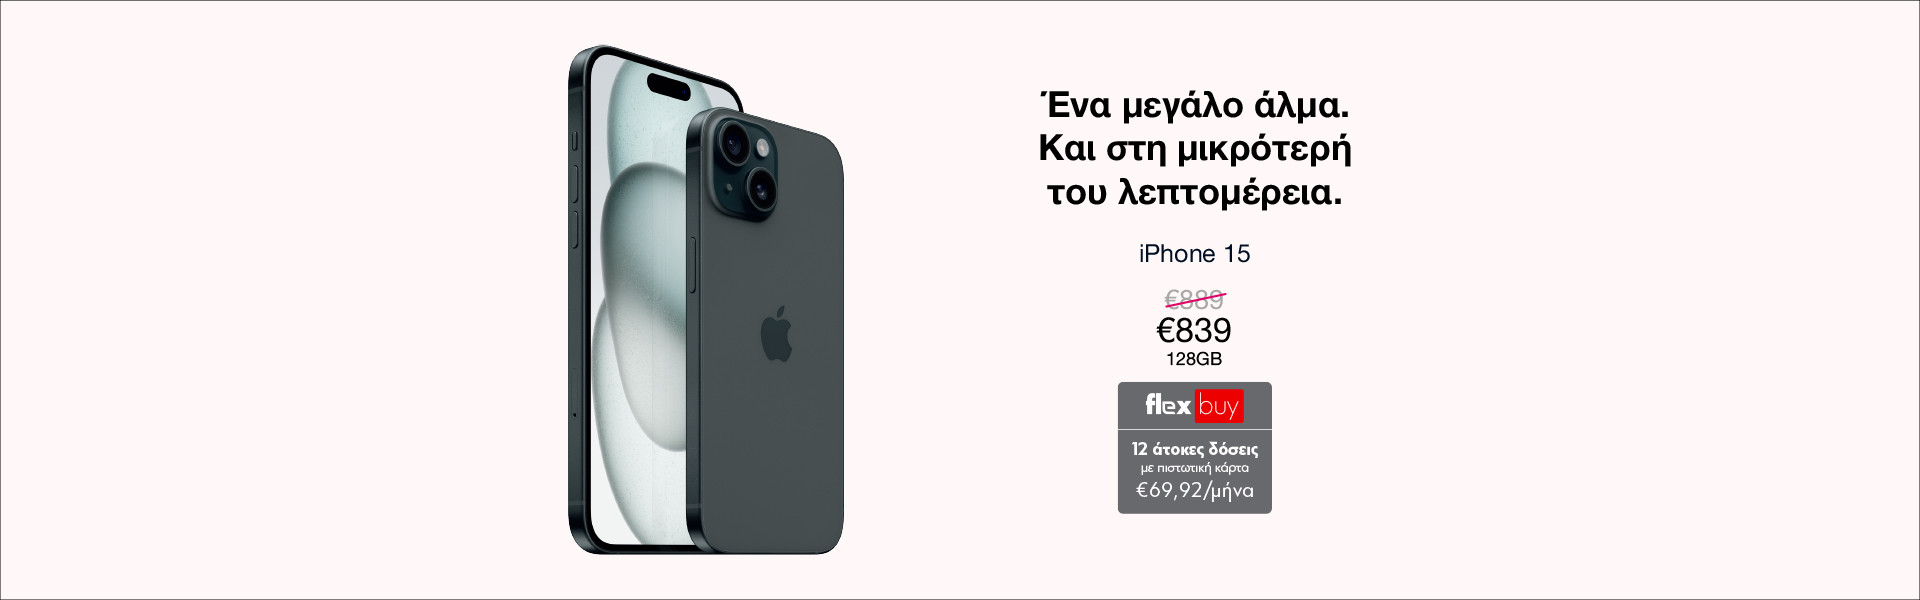 Main Banner Apple iPhone 15 April Campaign